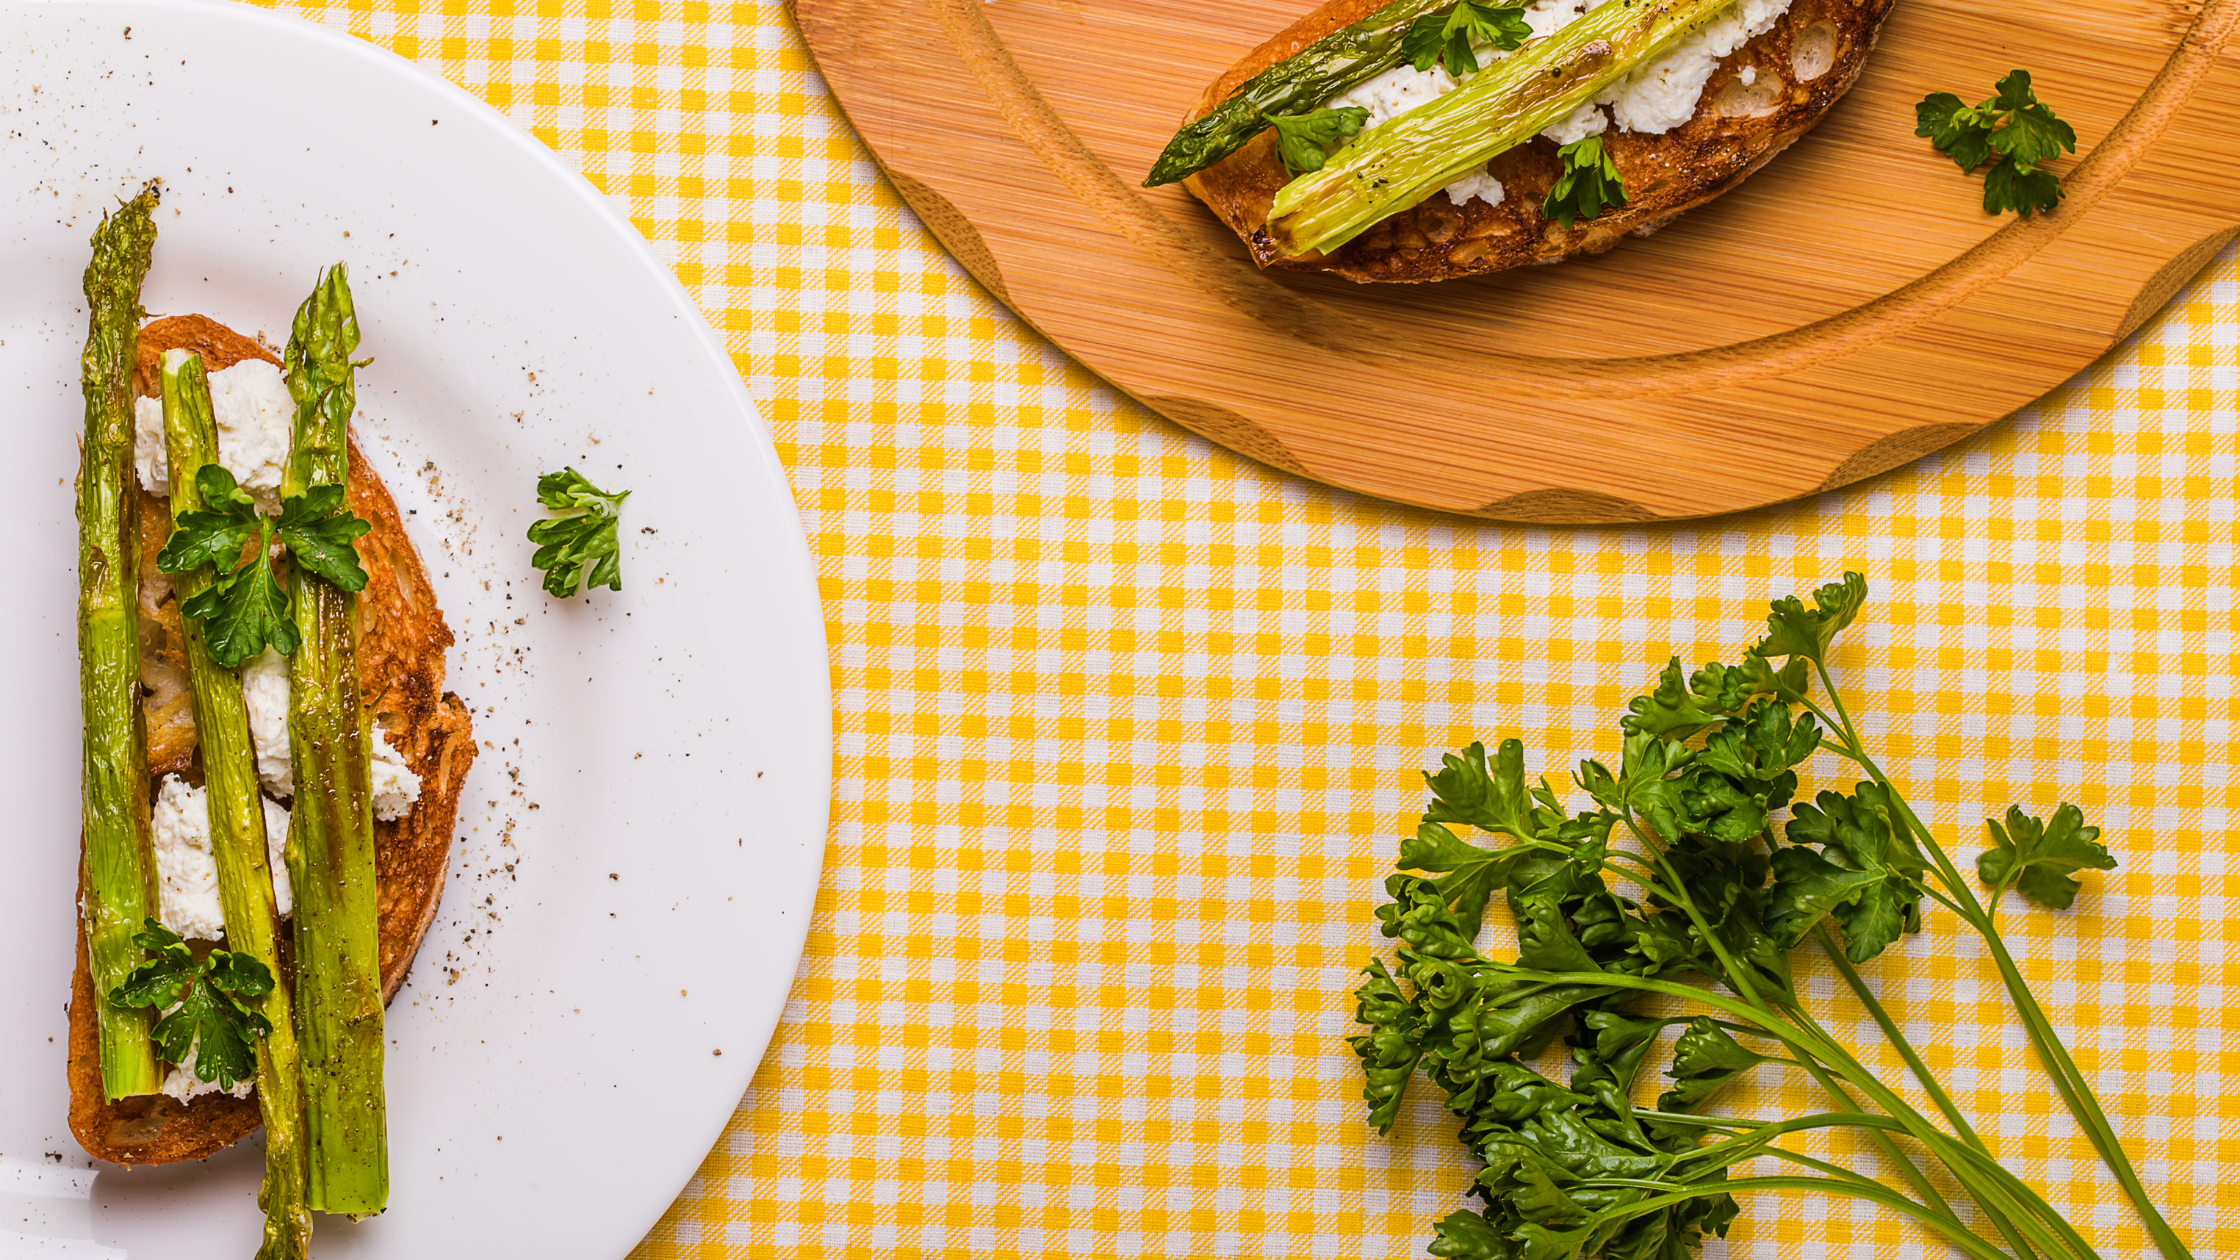 Yellow tablecloth and a plate with roasted asparagus